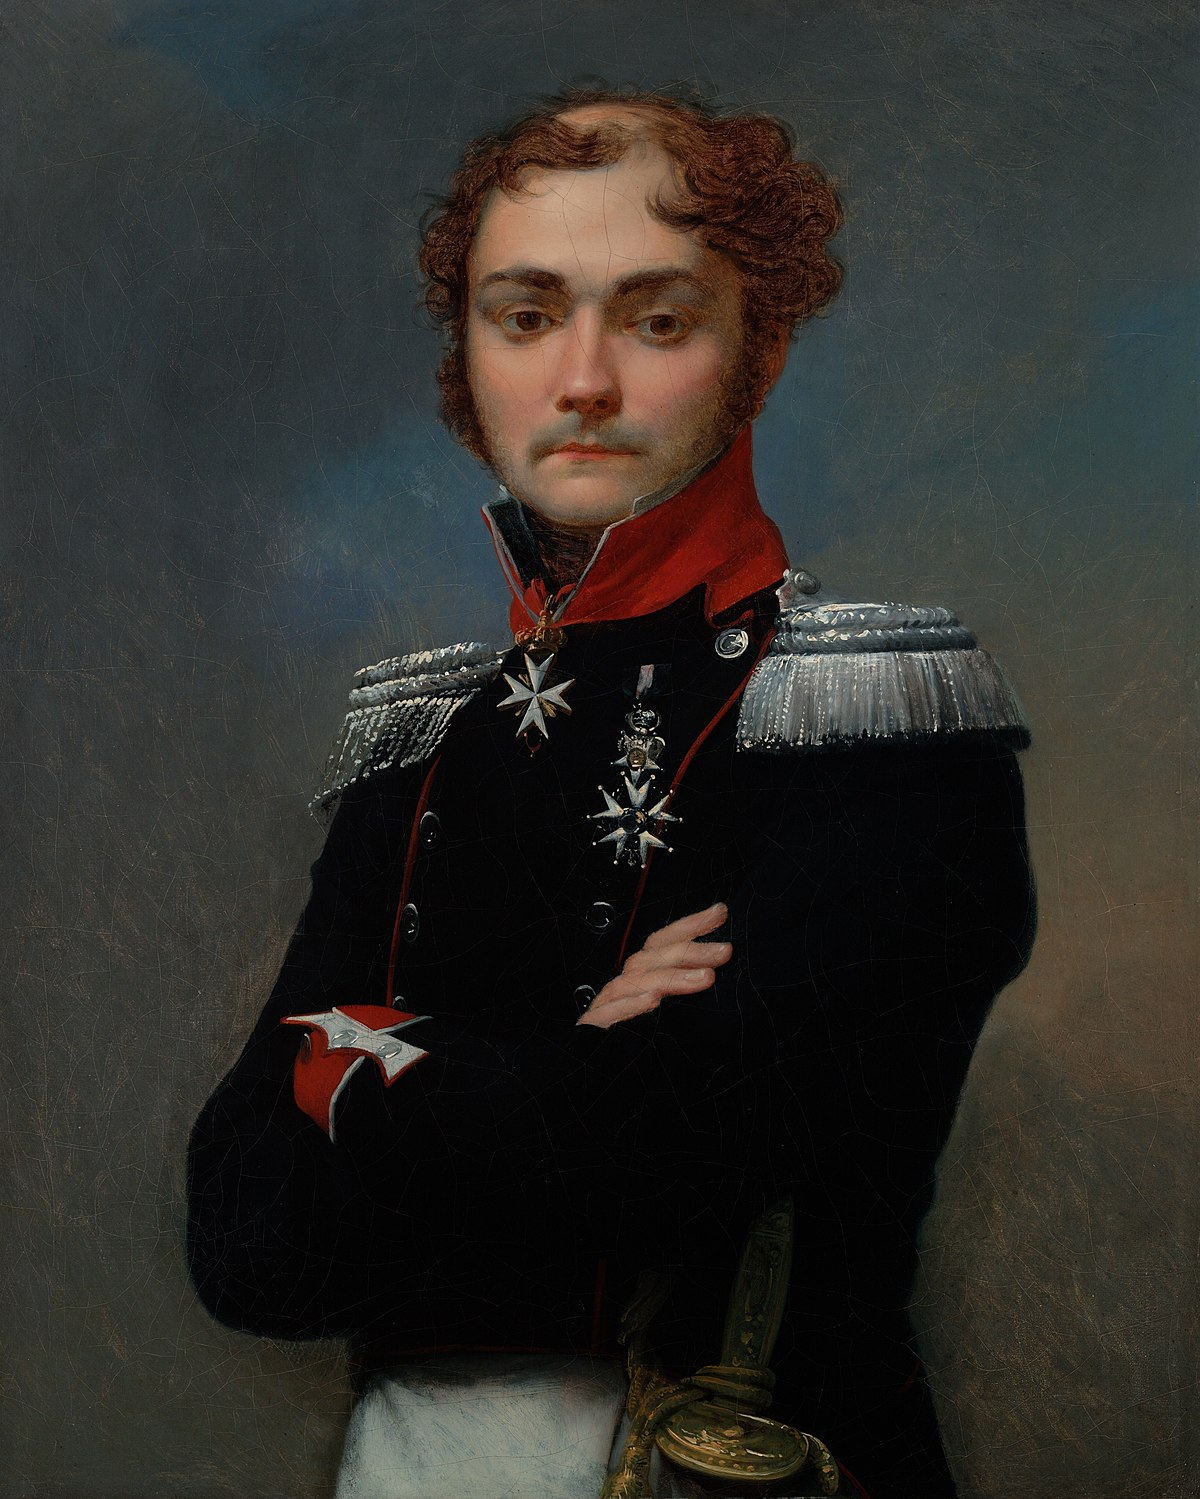 Jean-Baptiste_Regnault_-_Portrait_of_Charles-Louis_Regnault,_an_Officer_from_the_Napoleonic_Wa...jpg